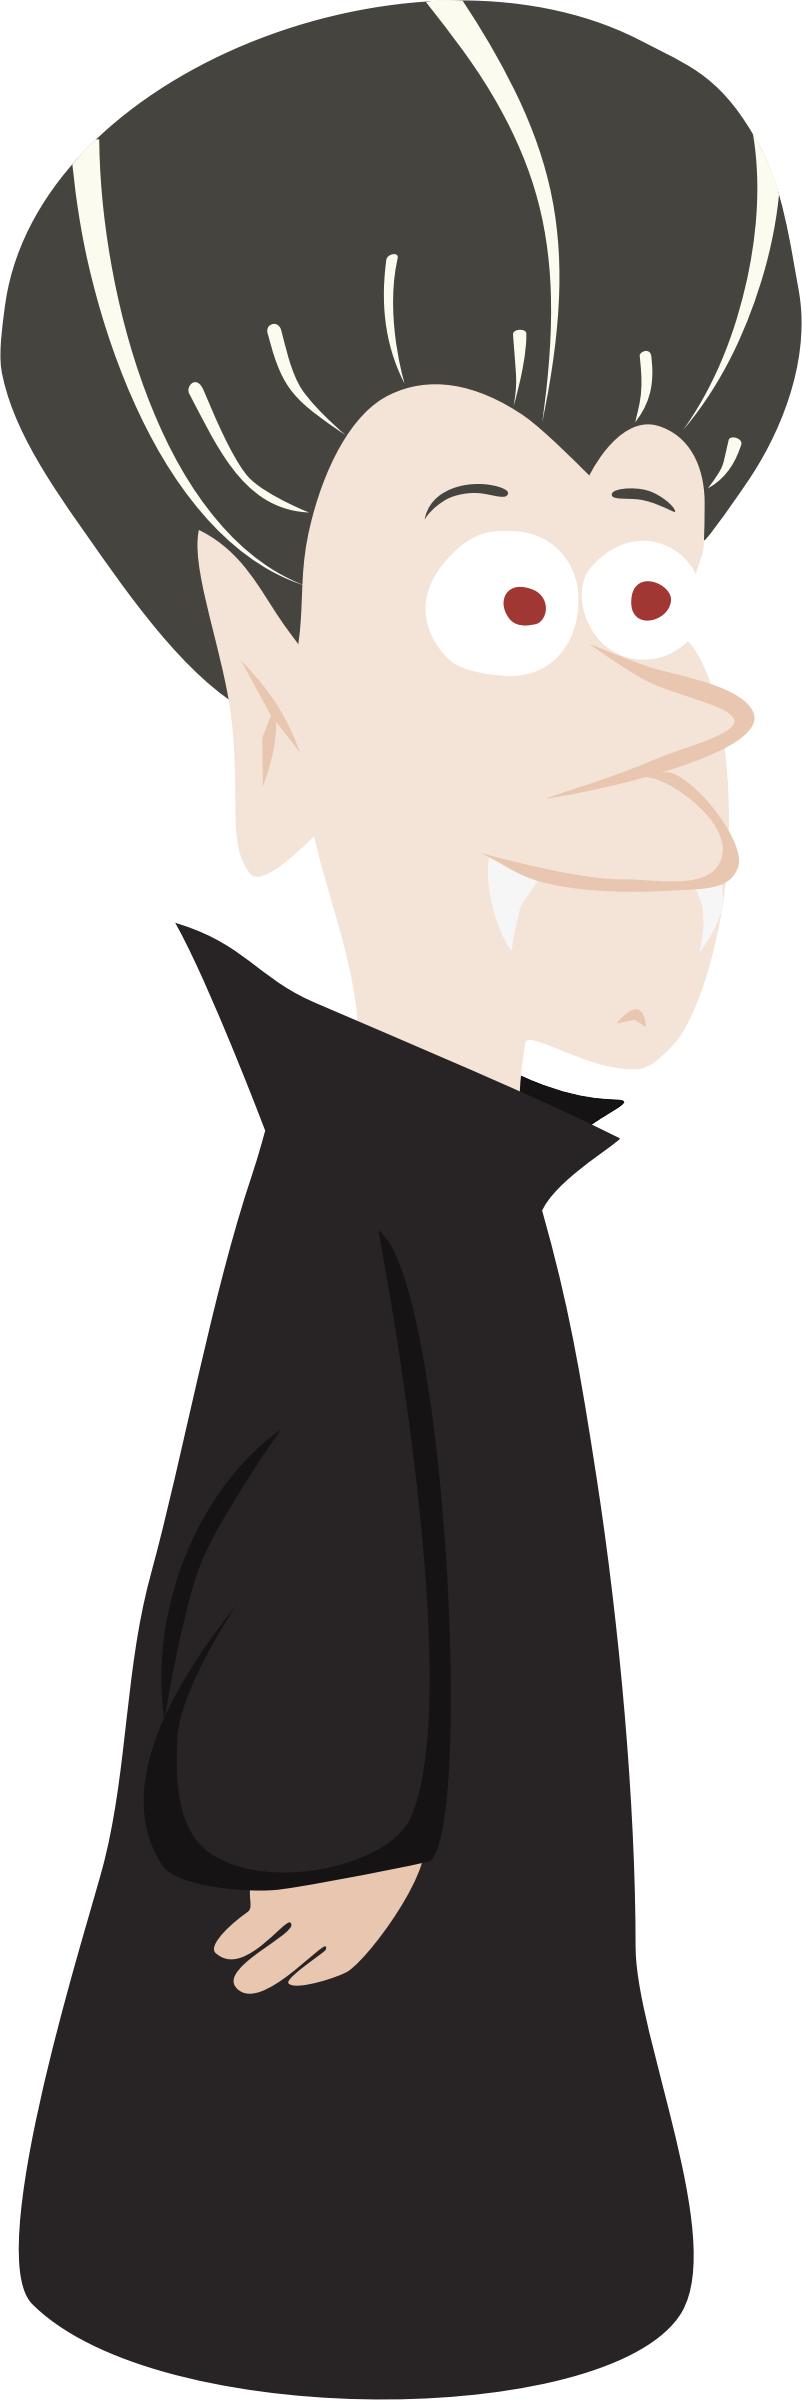 Old vampire character png